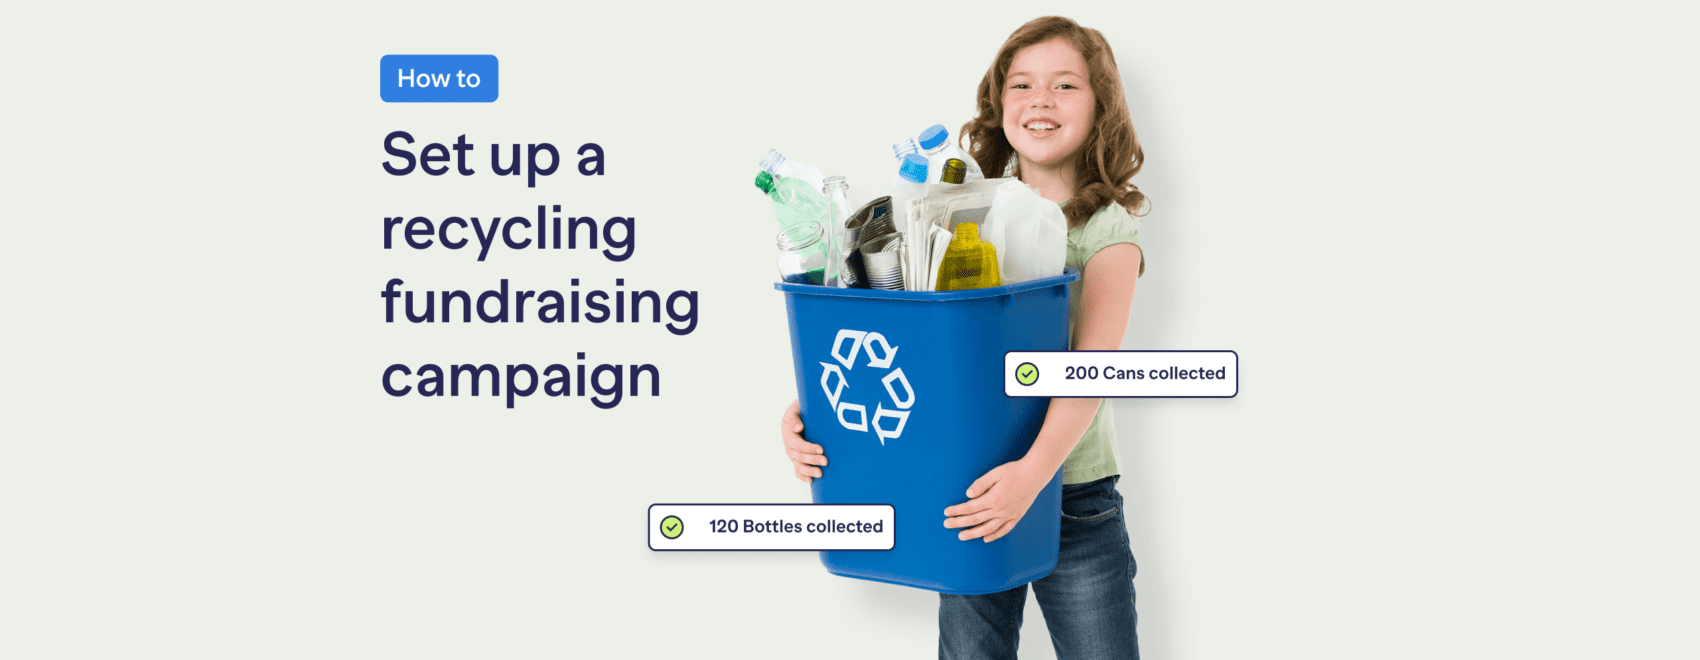 How to set up a recycling fundraising campaign